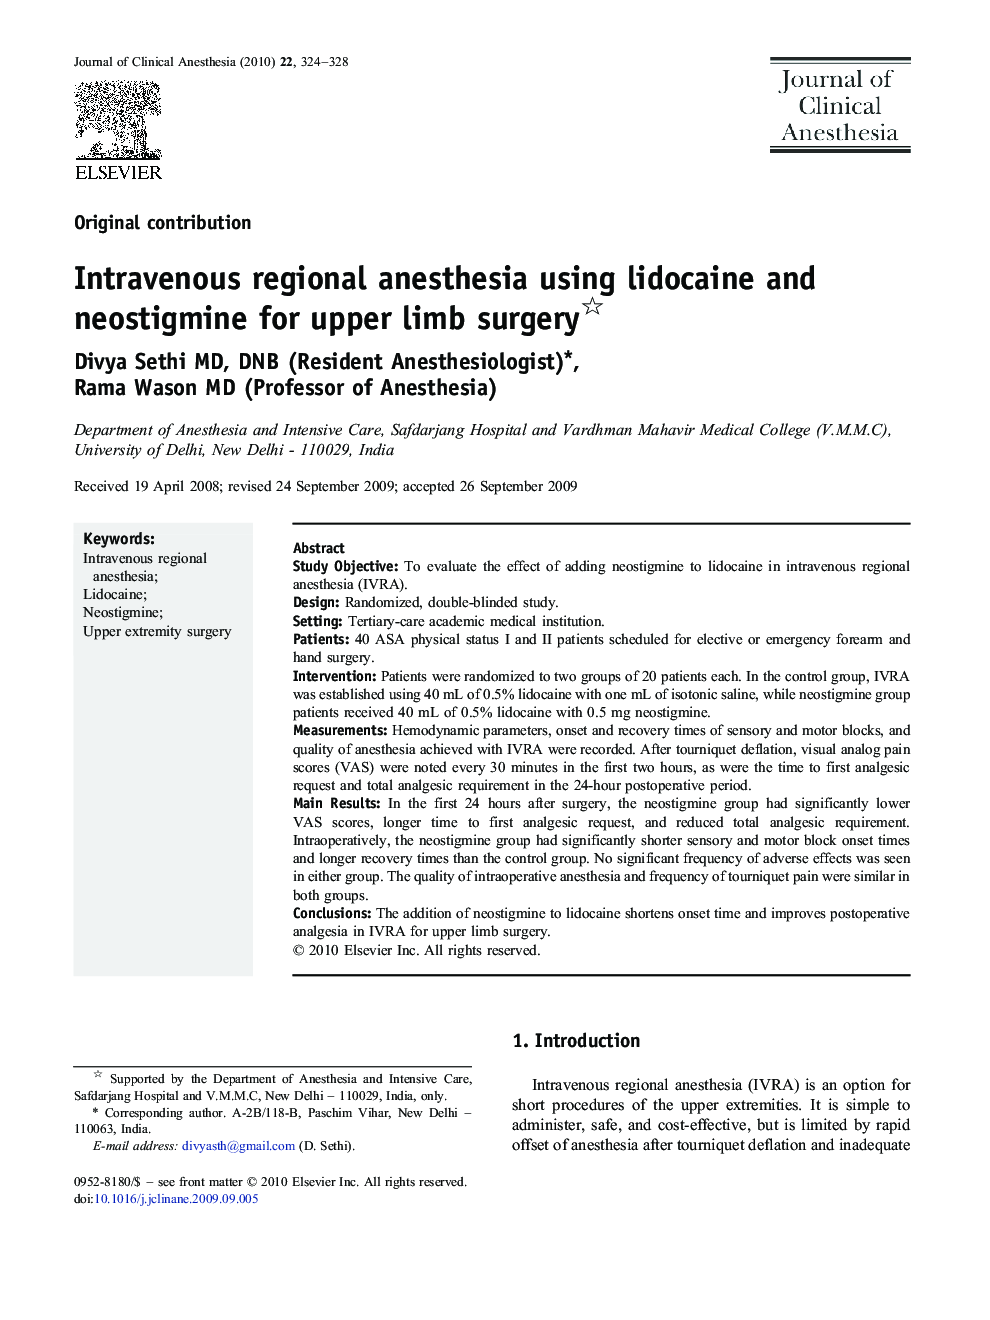 Intravenous regional anesthesia using lidocaine and neostigmine for upper limb surgery 